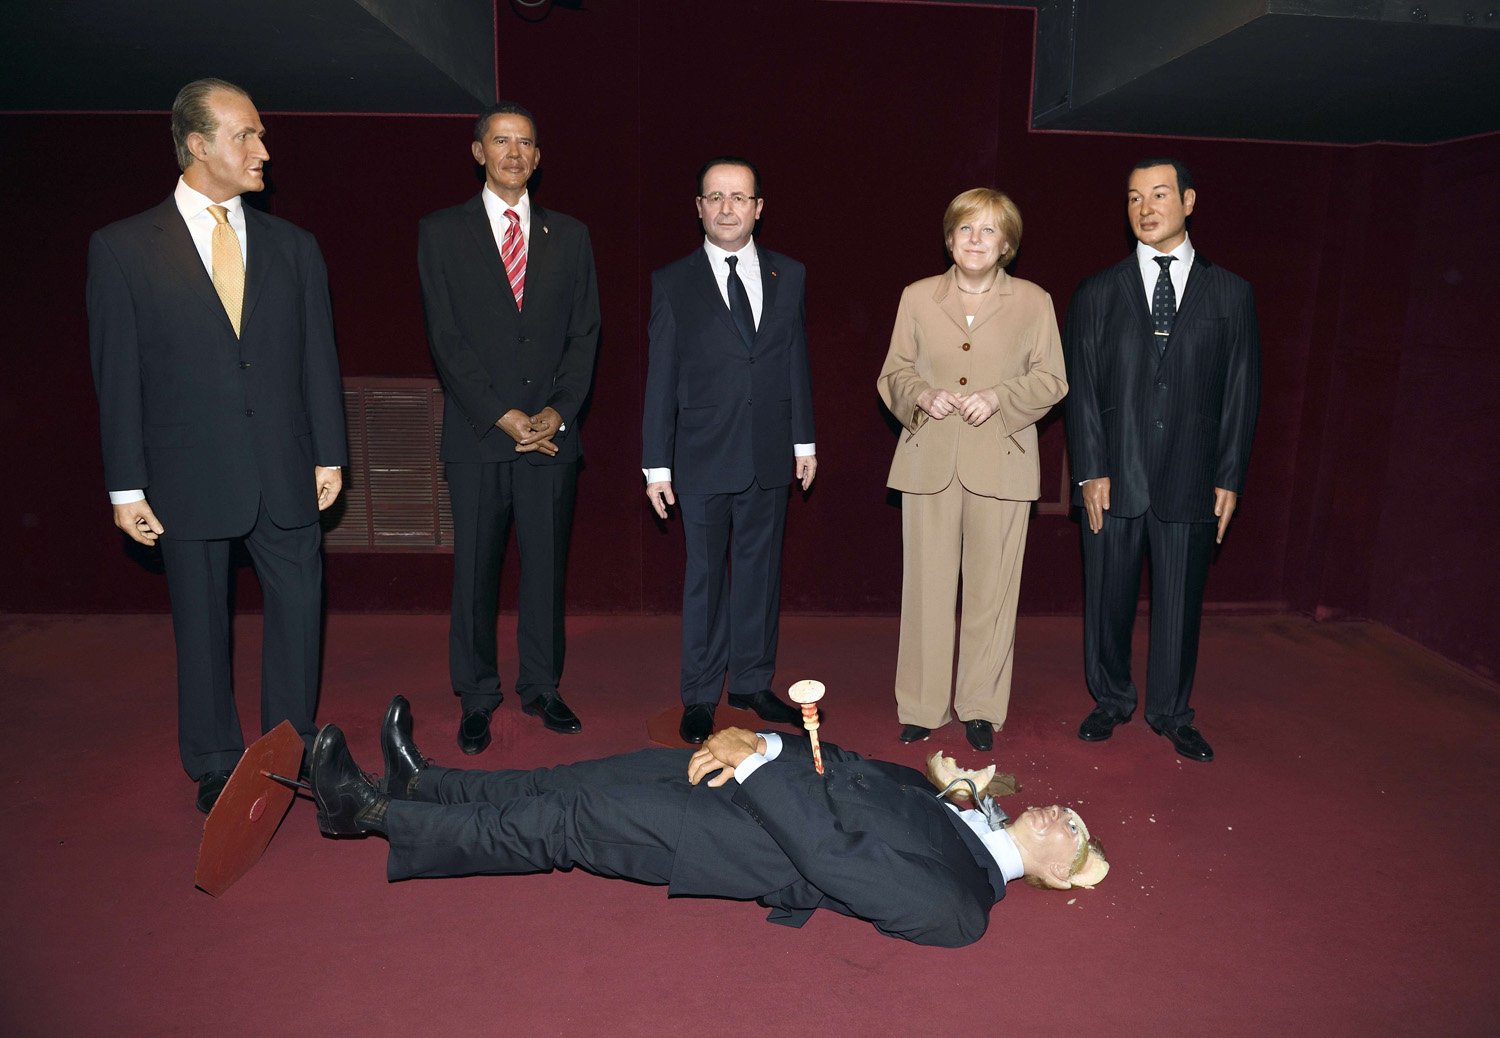 The wax statue representing Russian President Valadimir Putin whose head was damaged by an activist of the Femen feminist group lies on the floor next to wax statues of Spain's King Juan Carlos (L) US President Barack Obama (2ndL), French President Francois Hollande (C), German Cancellor Angela Merkel (2ndR) and Morocco's King Mohamed VI (R) at the Grevin museum in Paris on June 5, 2014.